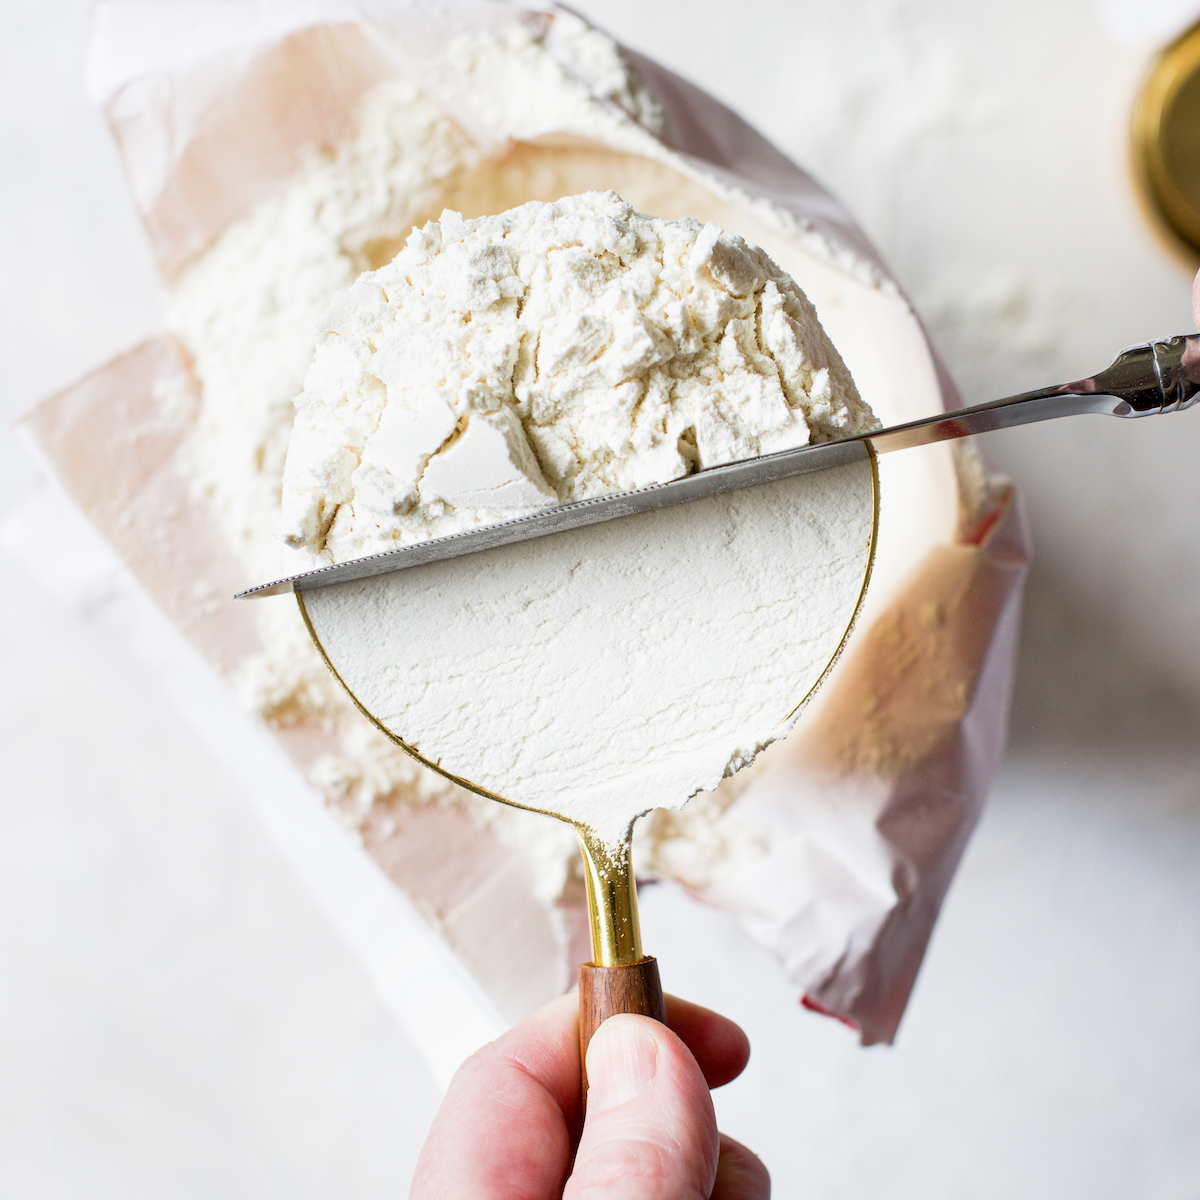 How to Properly Measure Flour (Without a Scale)